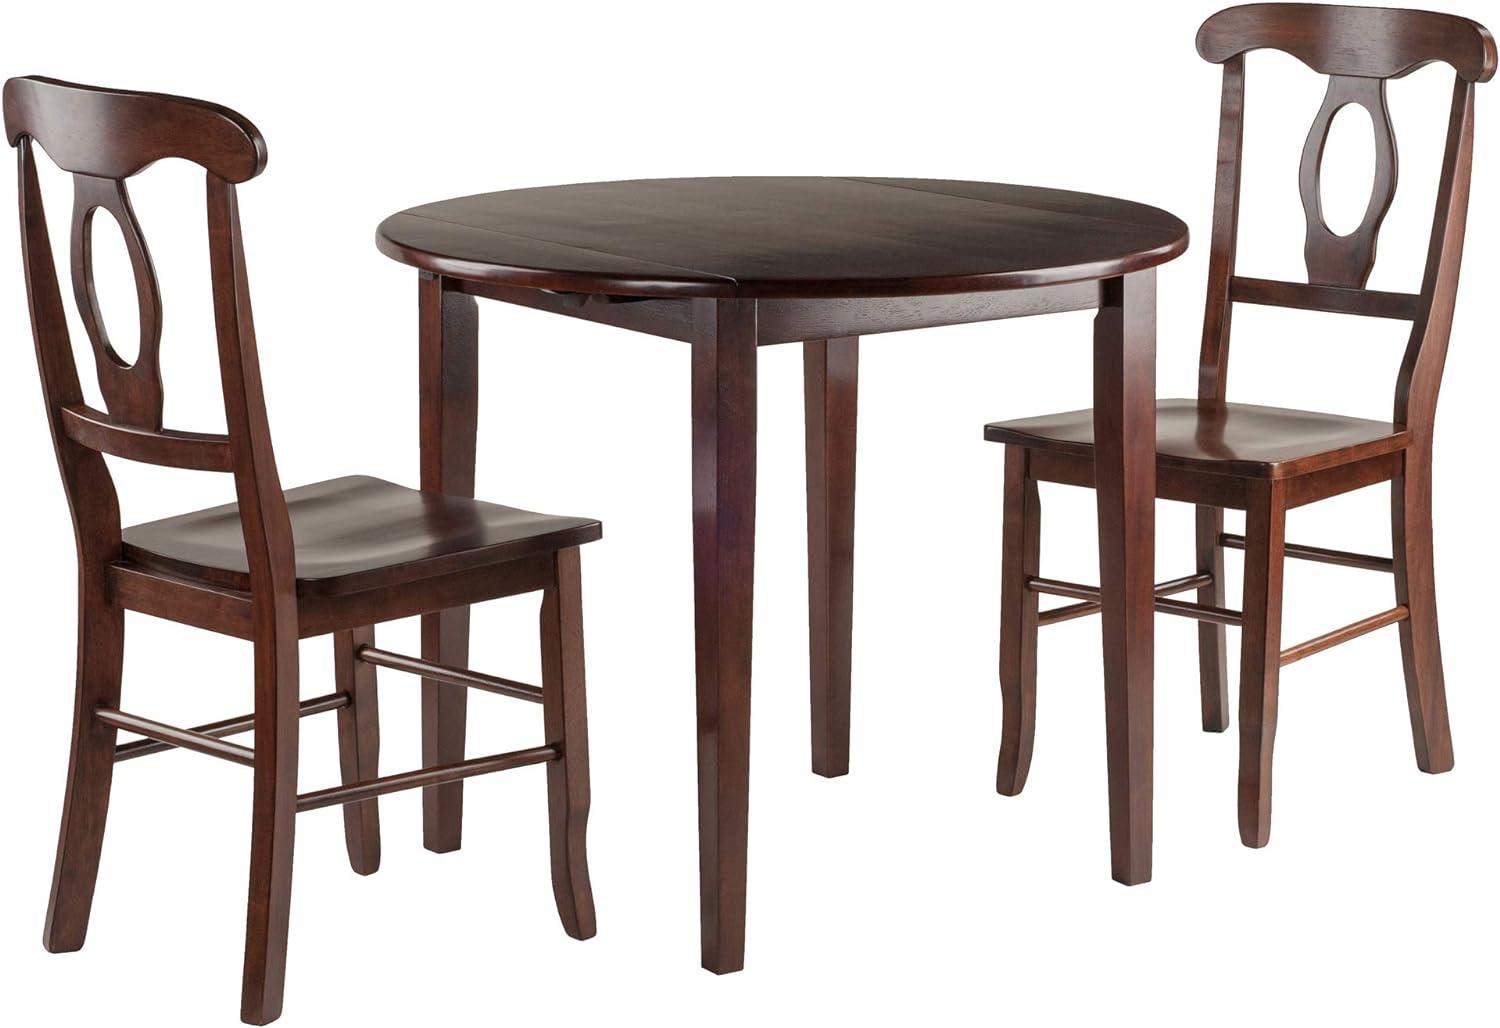 Walnut Finish Transitional Drop Leaf Dining Set with Keyhole Back Chairs